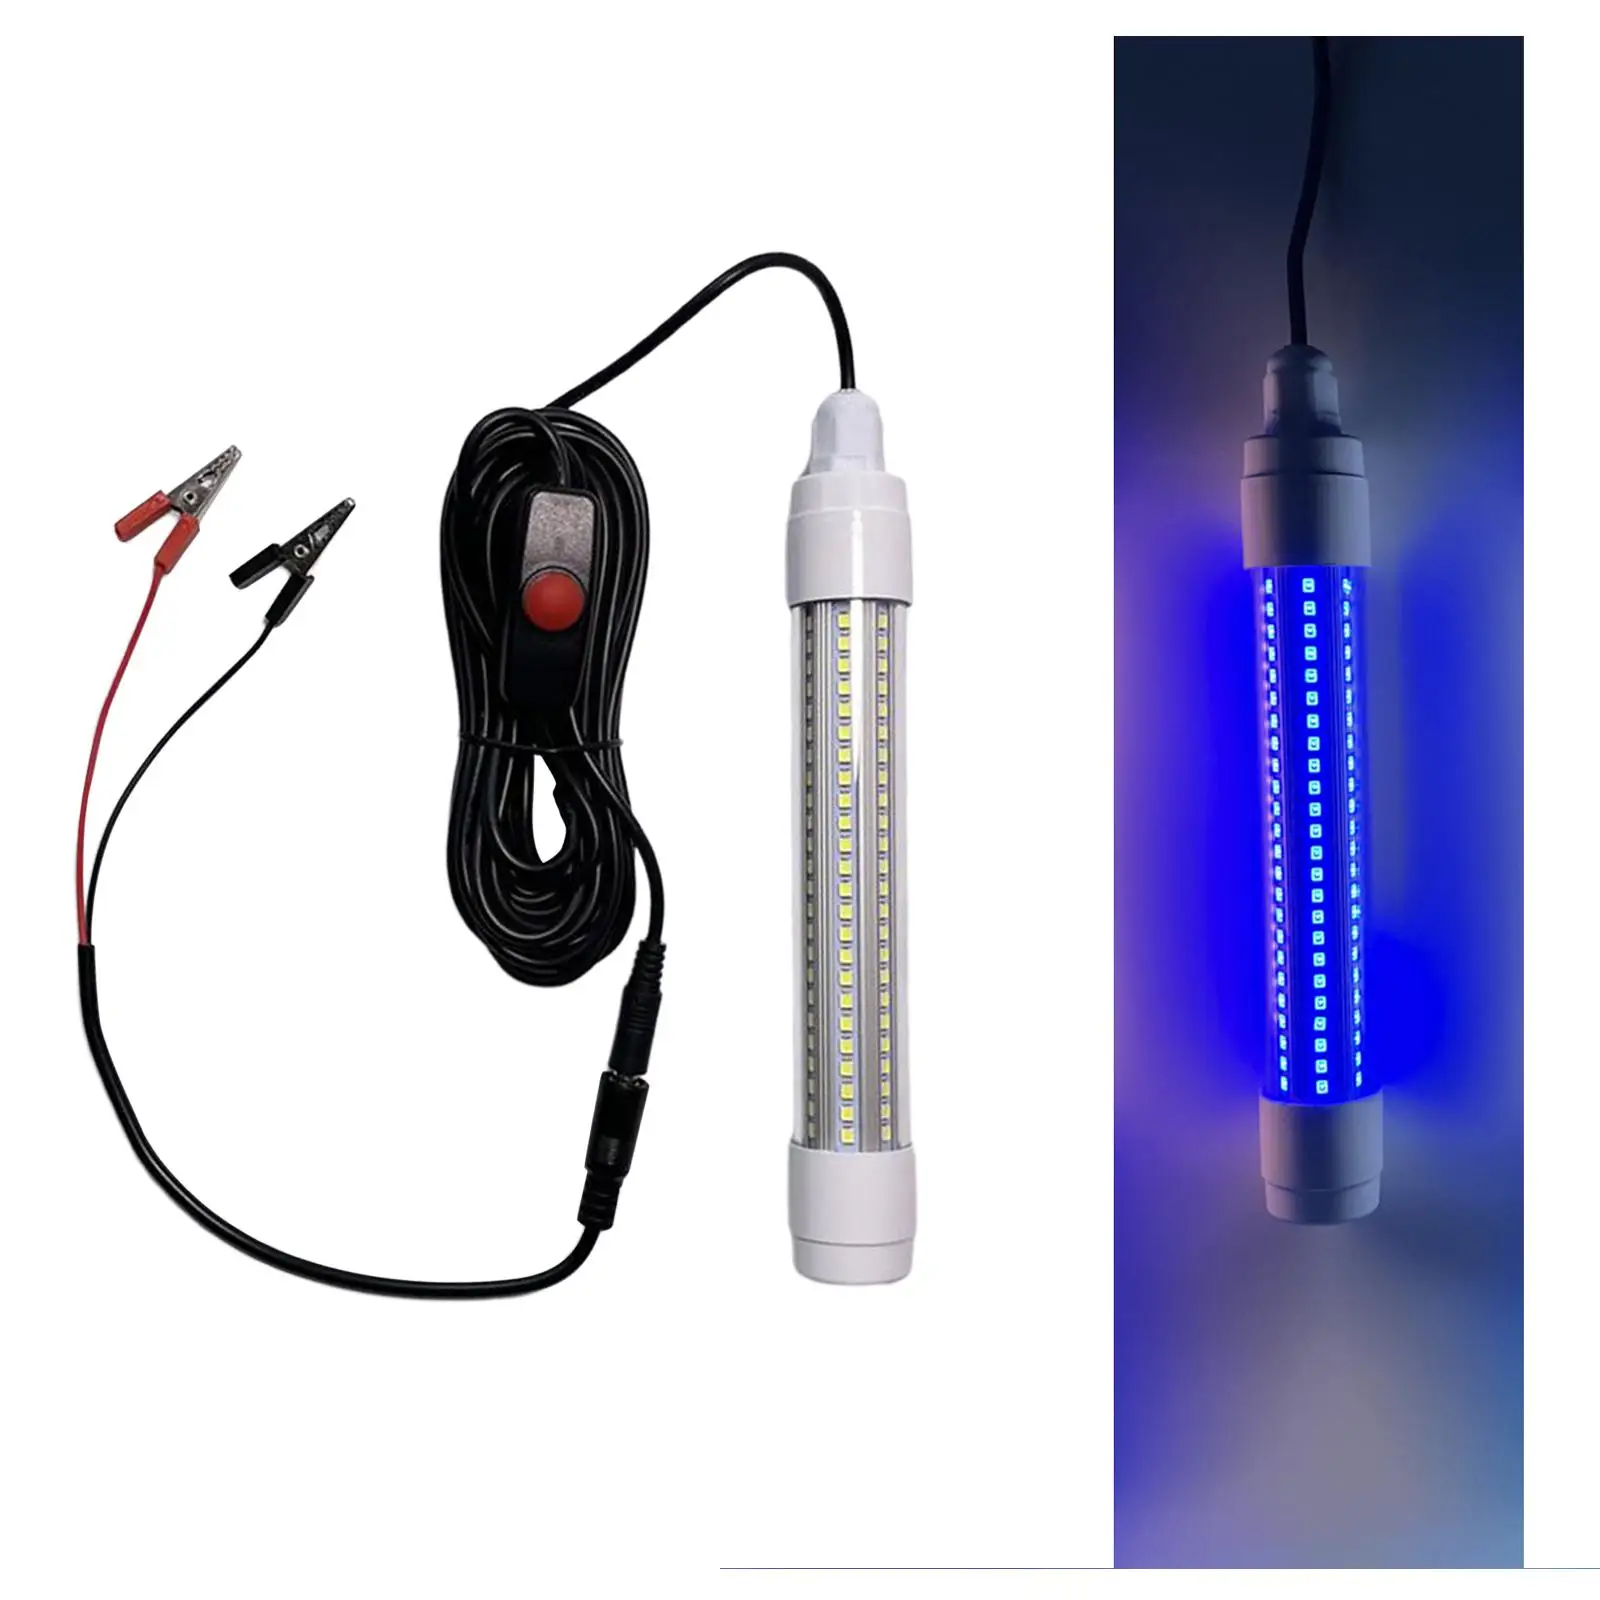 12V Fishing Light Lampswith 5M Power Cord Submersible Squid Attracter Light